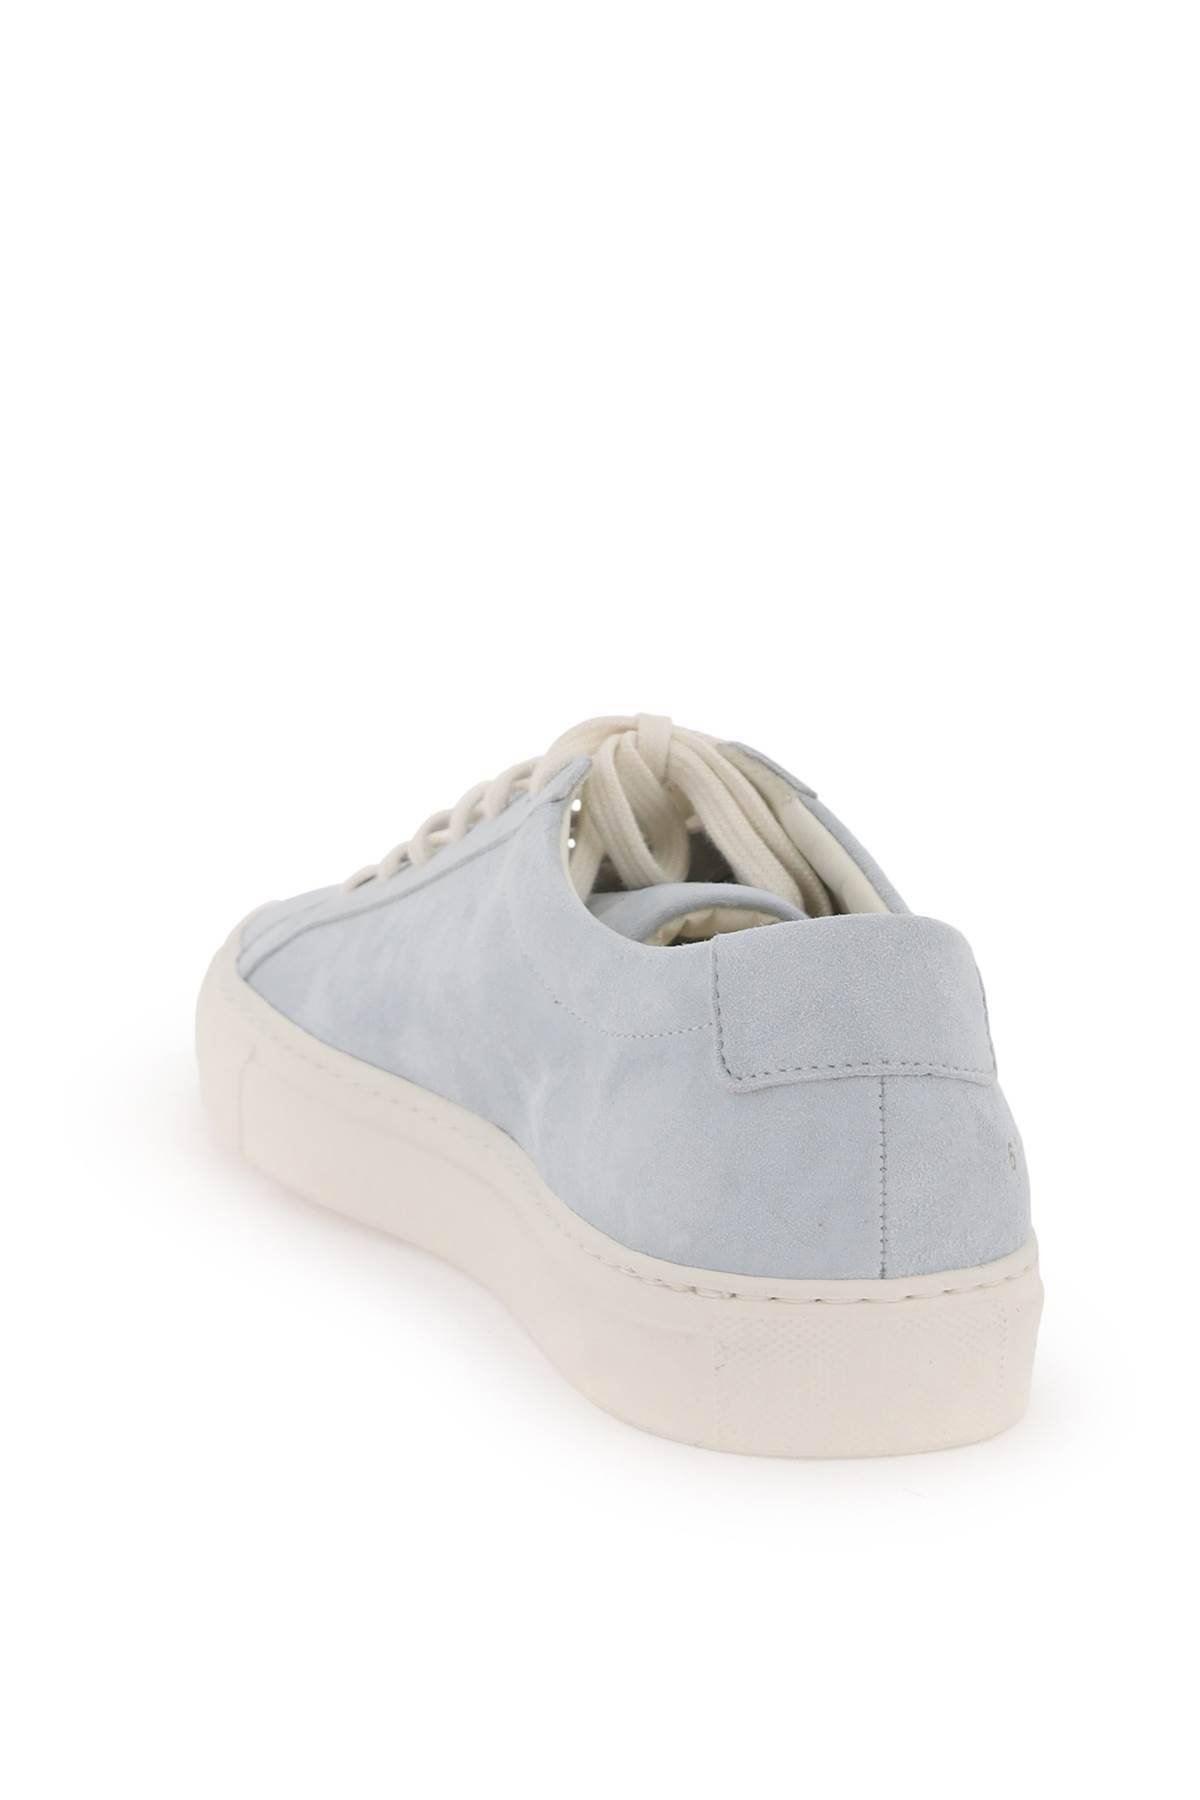 Shop Common Projects Suede Original Achilles Sneakers In Light Blue